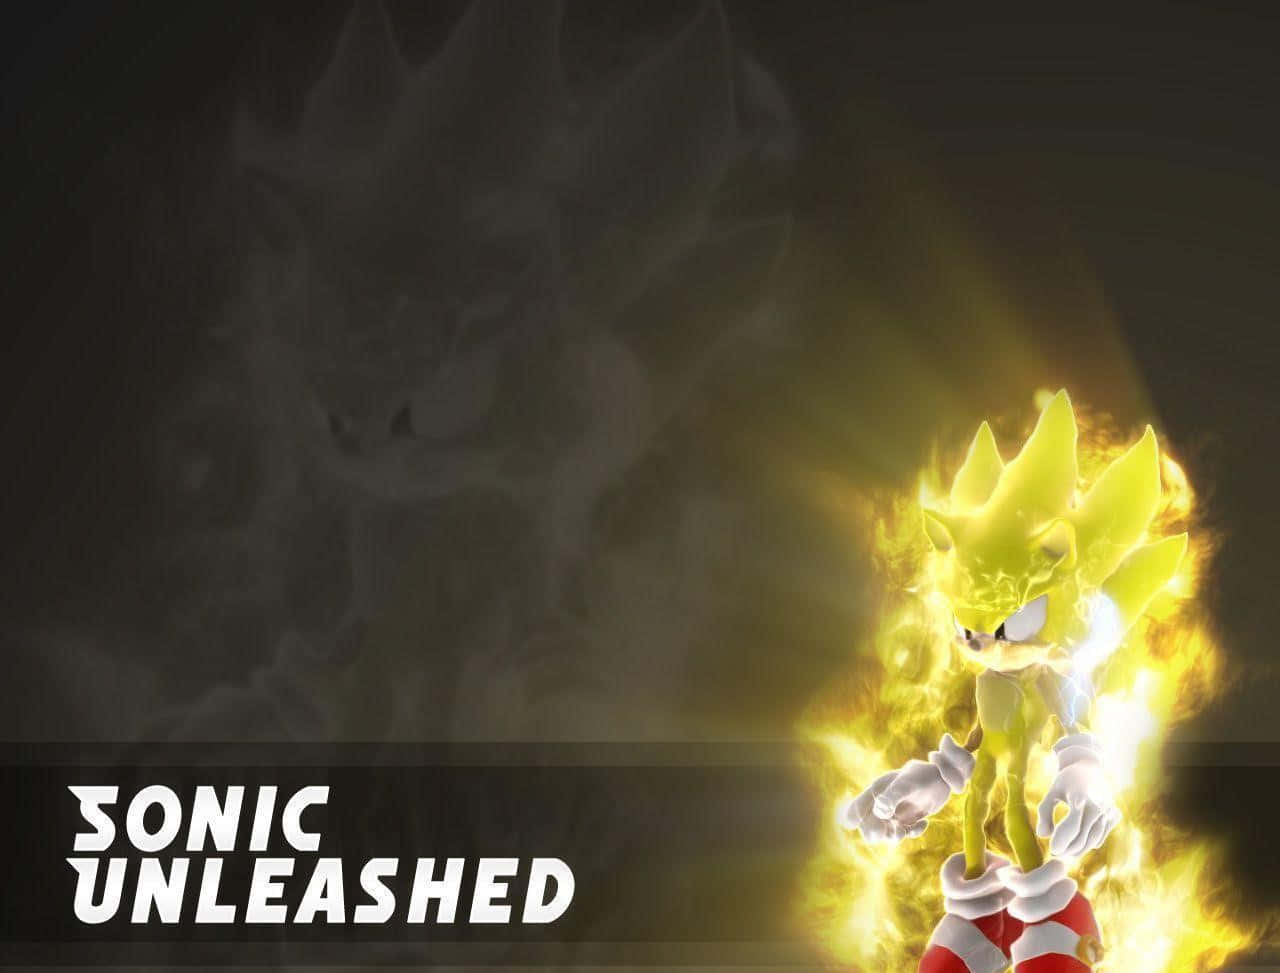 Sonicunleashed Tapet - Sonic Unleashed Tapet